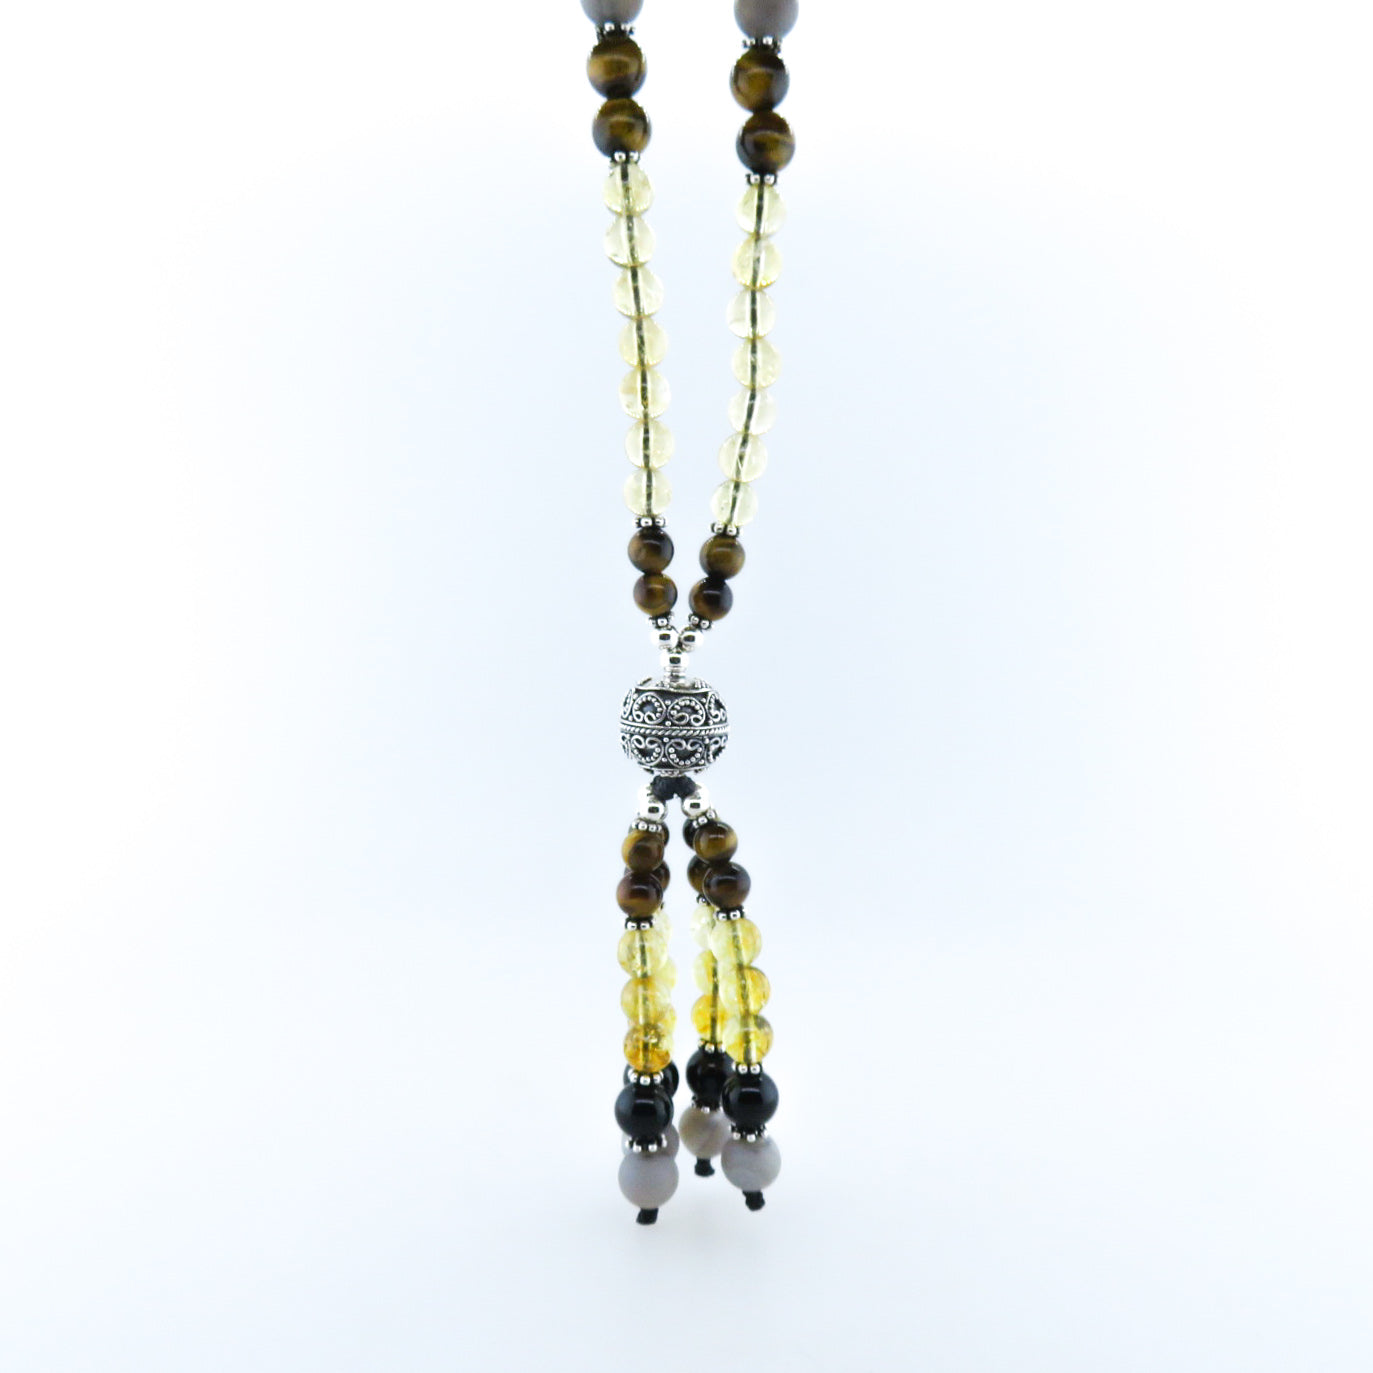 Citrine Necklace with Agate, Tiger's Eye, Black Onyx and Silver Beads